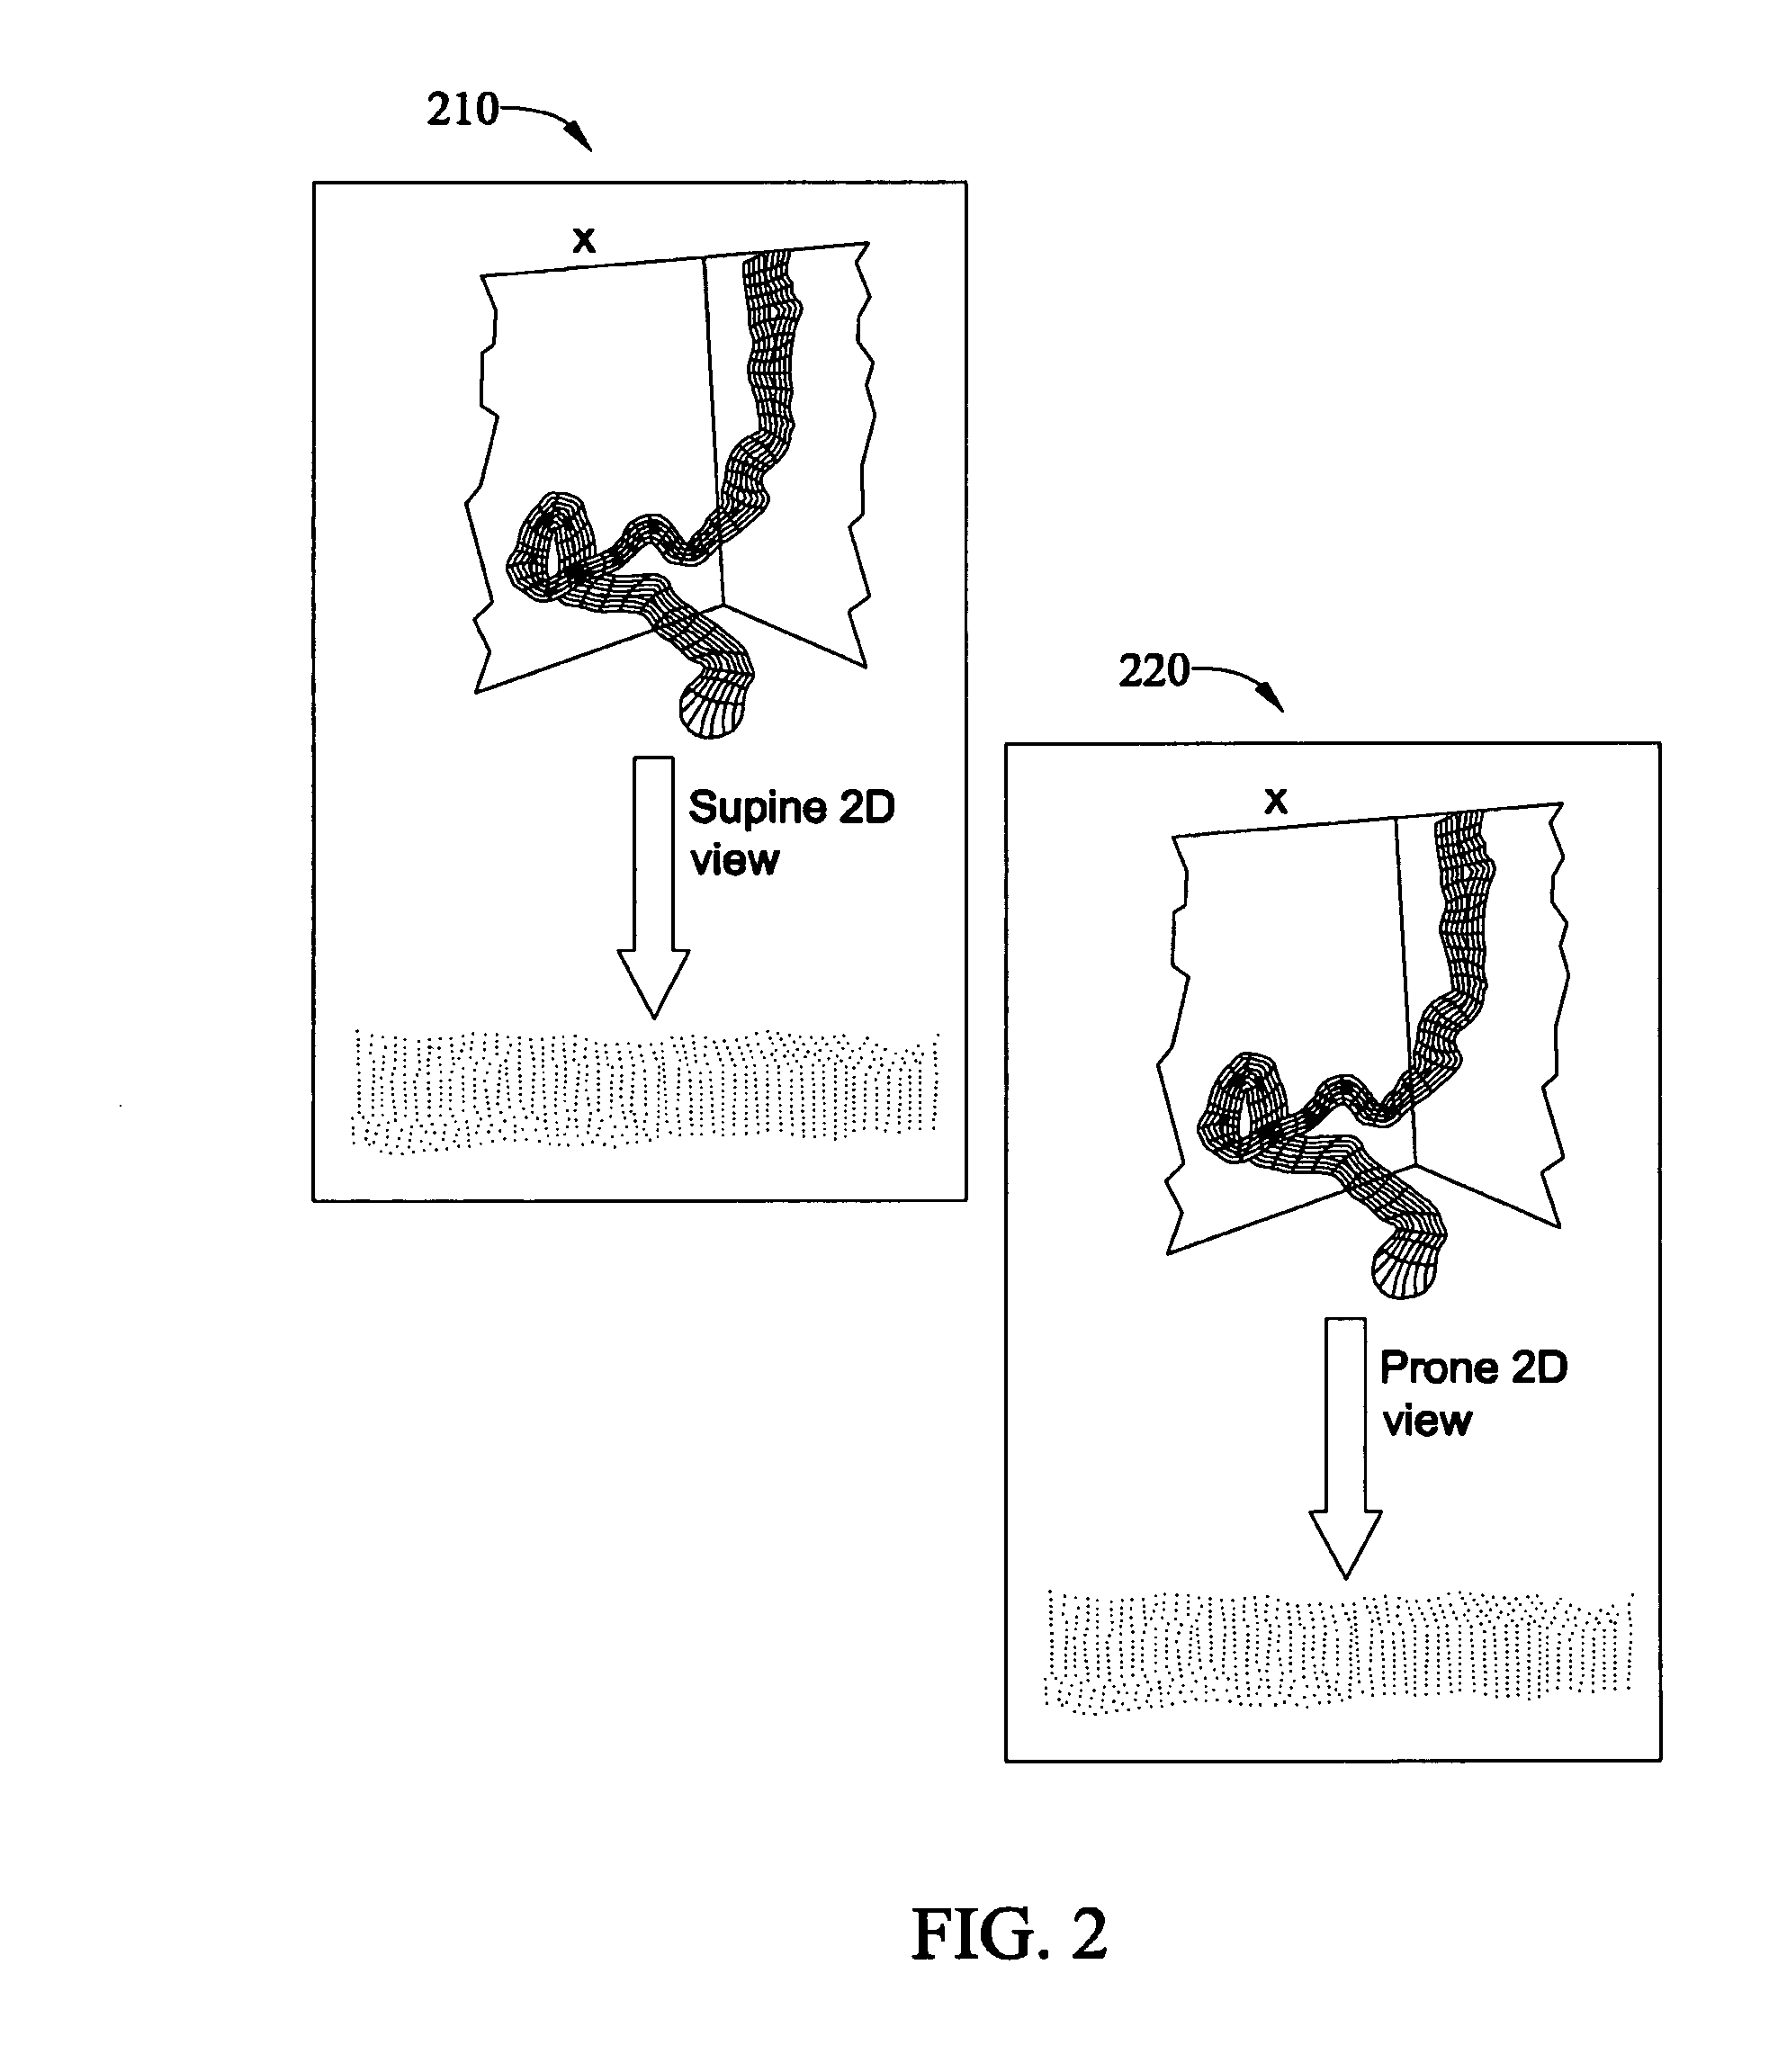 Method and apparatus for synchronizing corresponding landmarks among a plurality of images